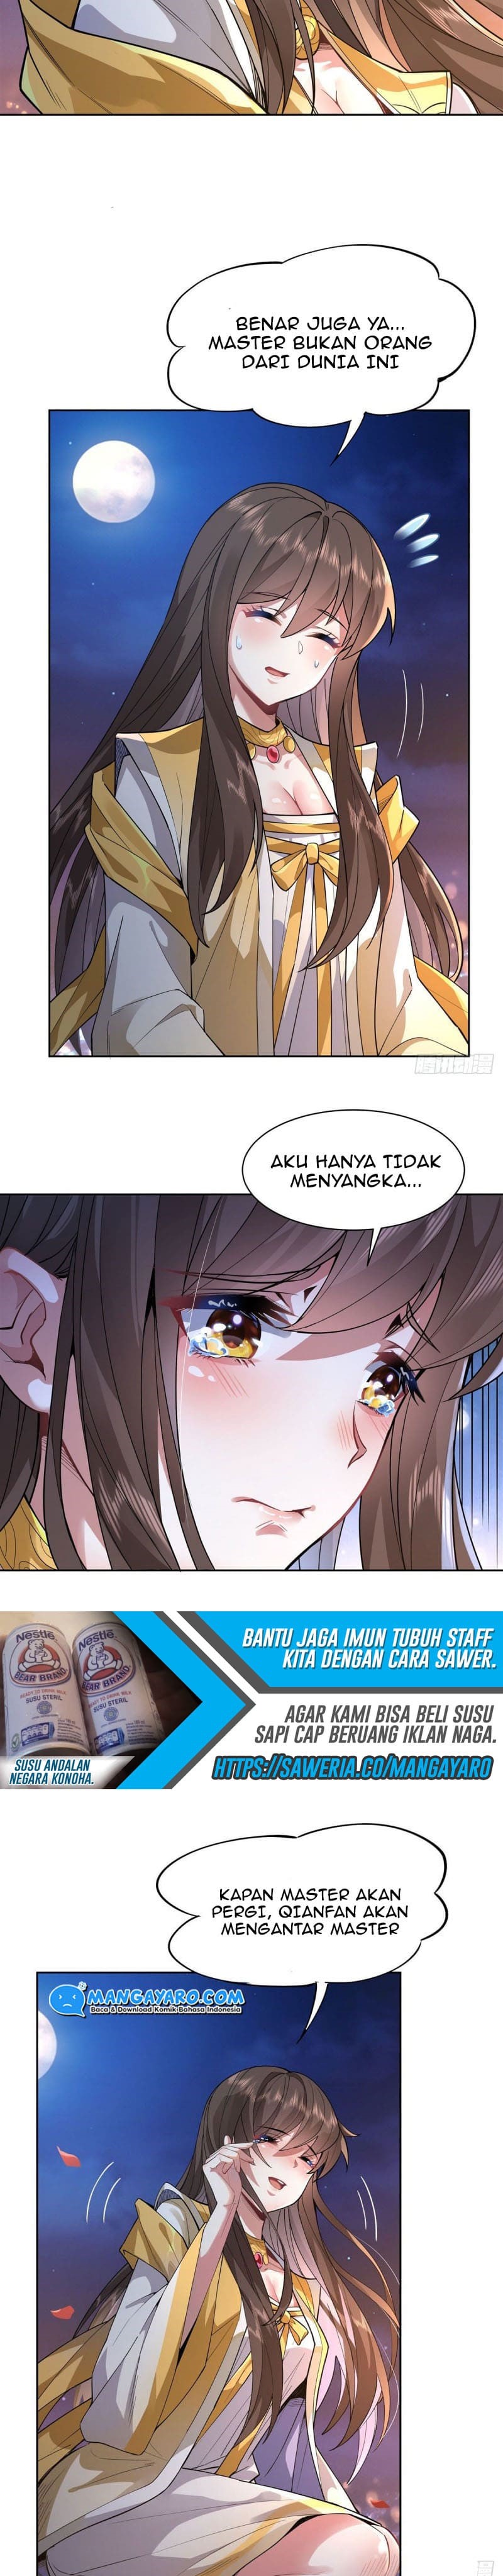 Dilarang COPAS - situs resmi www.mangacanblog.com - Komik my female apprentices are all big shots from the future 036 - chapter 36 37 Indonesia my female apprentices are all big shots from the future 036 - chapter 36 Terbaru 5|Baca Manga Komik Indonesia|Mangacan